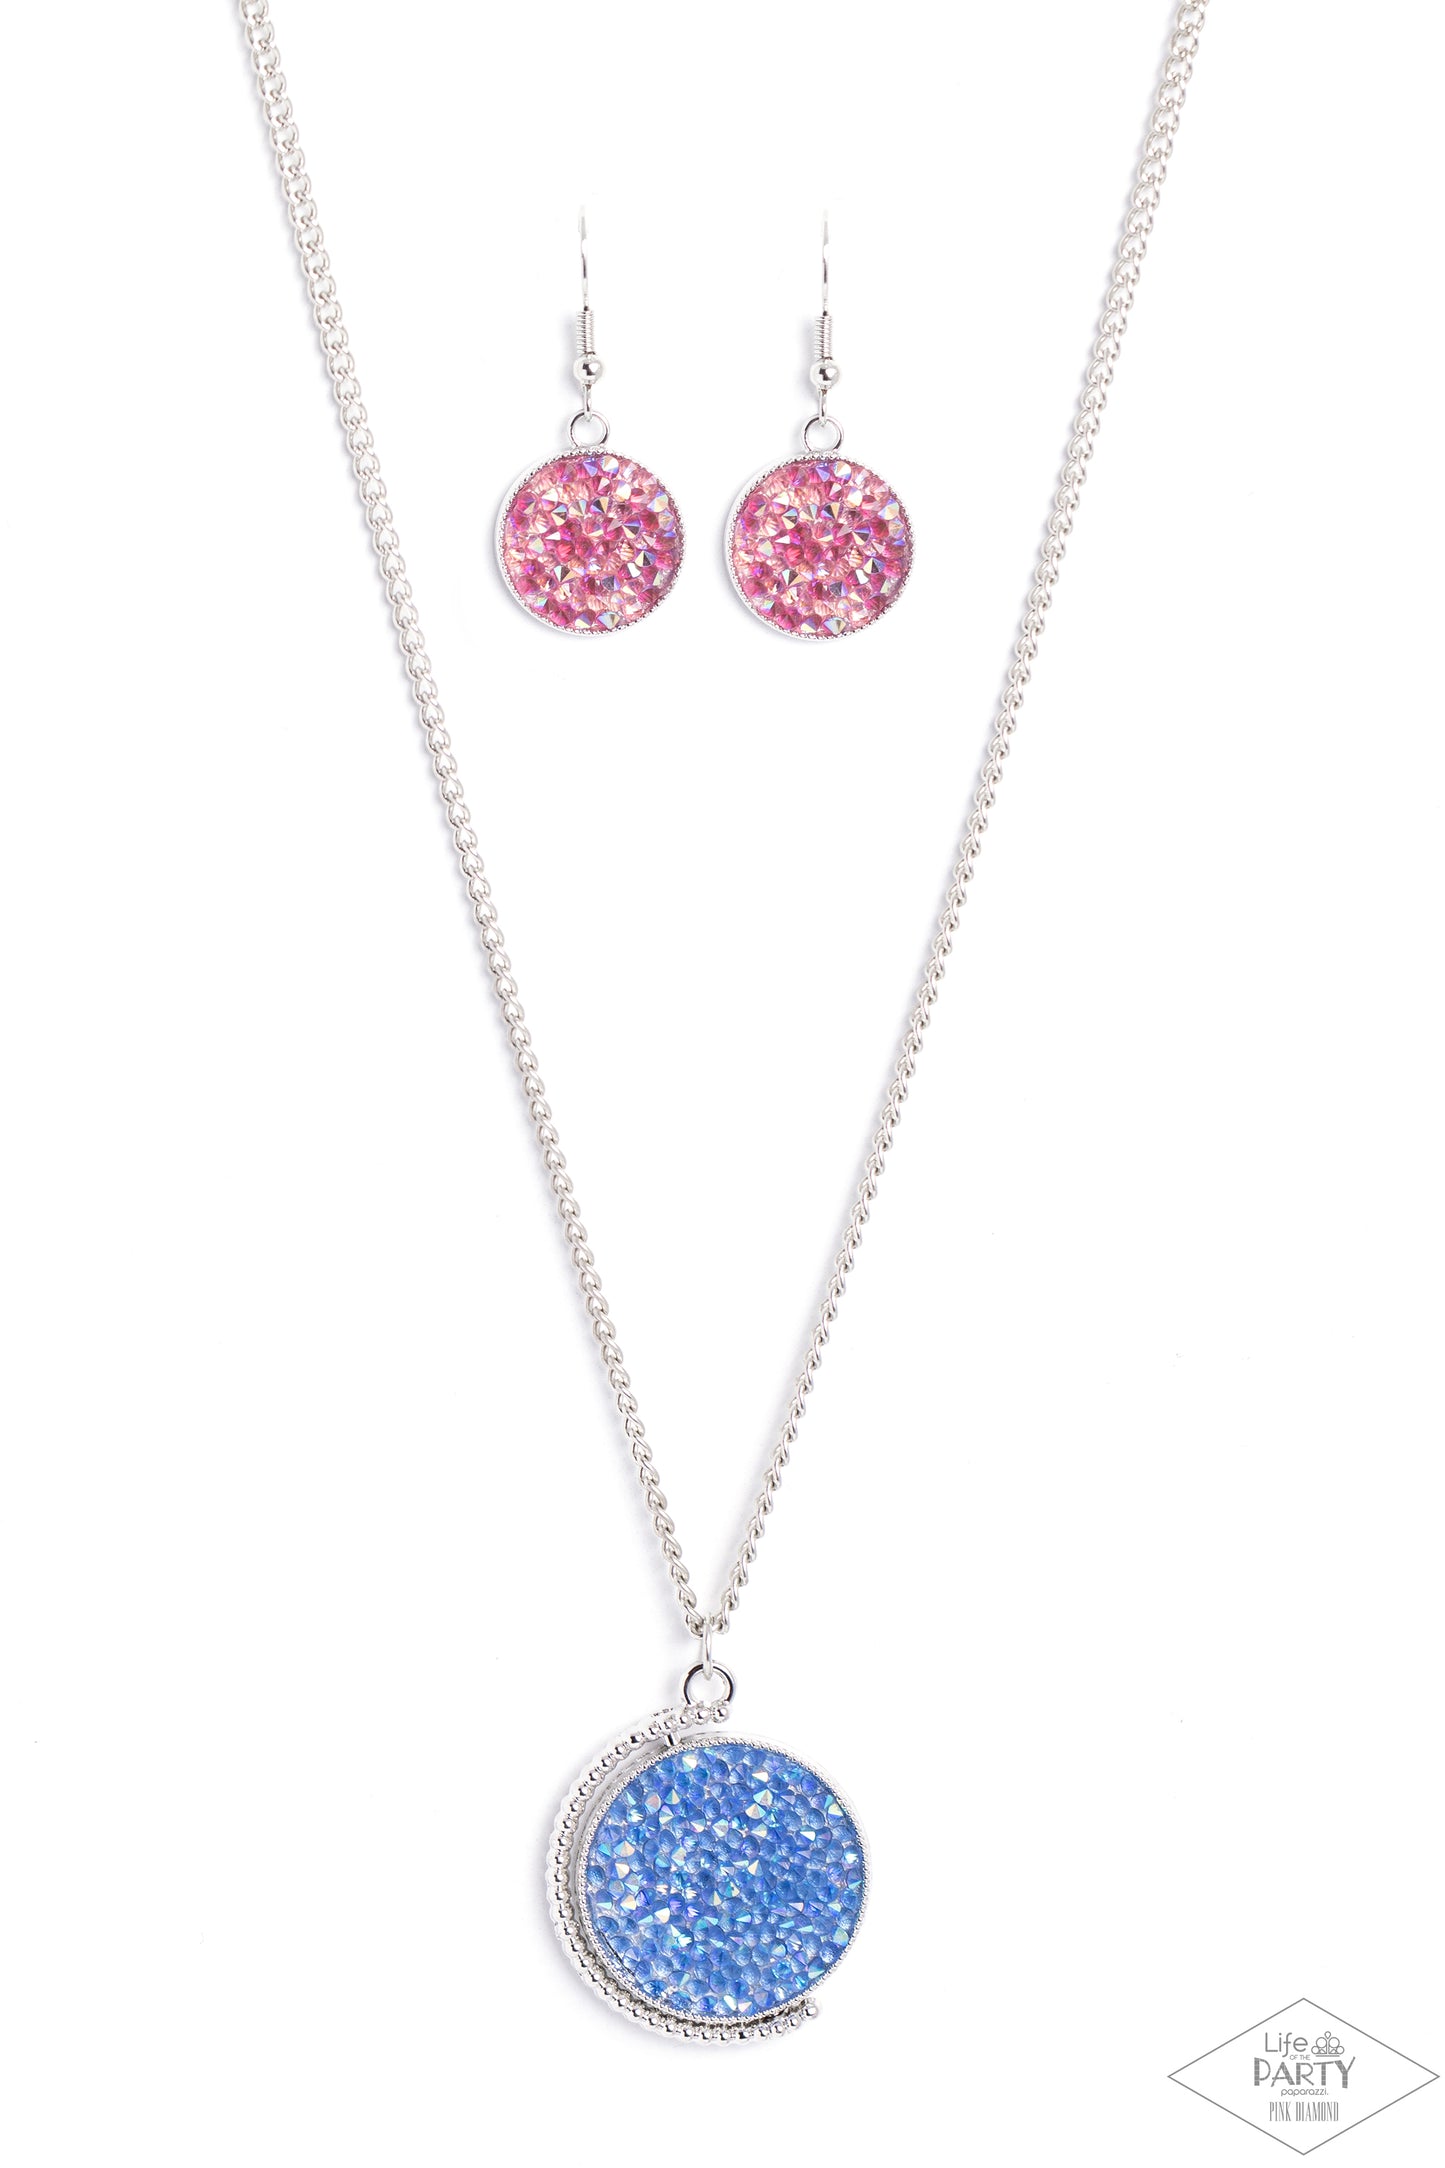 My Moon and Stars Multi Necklace - Paparazzi Accessories  A smoldering collision of blue iridescent and pink iridescent rhinestones are encrusted across the front and back of a textured silver disc below the collar. Threaded along a dainty rod, the glittery pendant effortlessly spins on its axis inside a silver studded half-circle frame. Features an adjustable clasp closure. Due to its prismatic palette, color may vary.